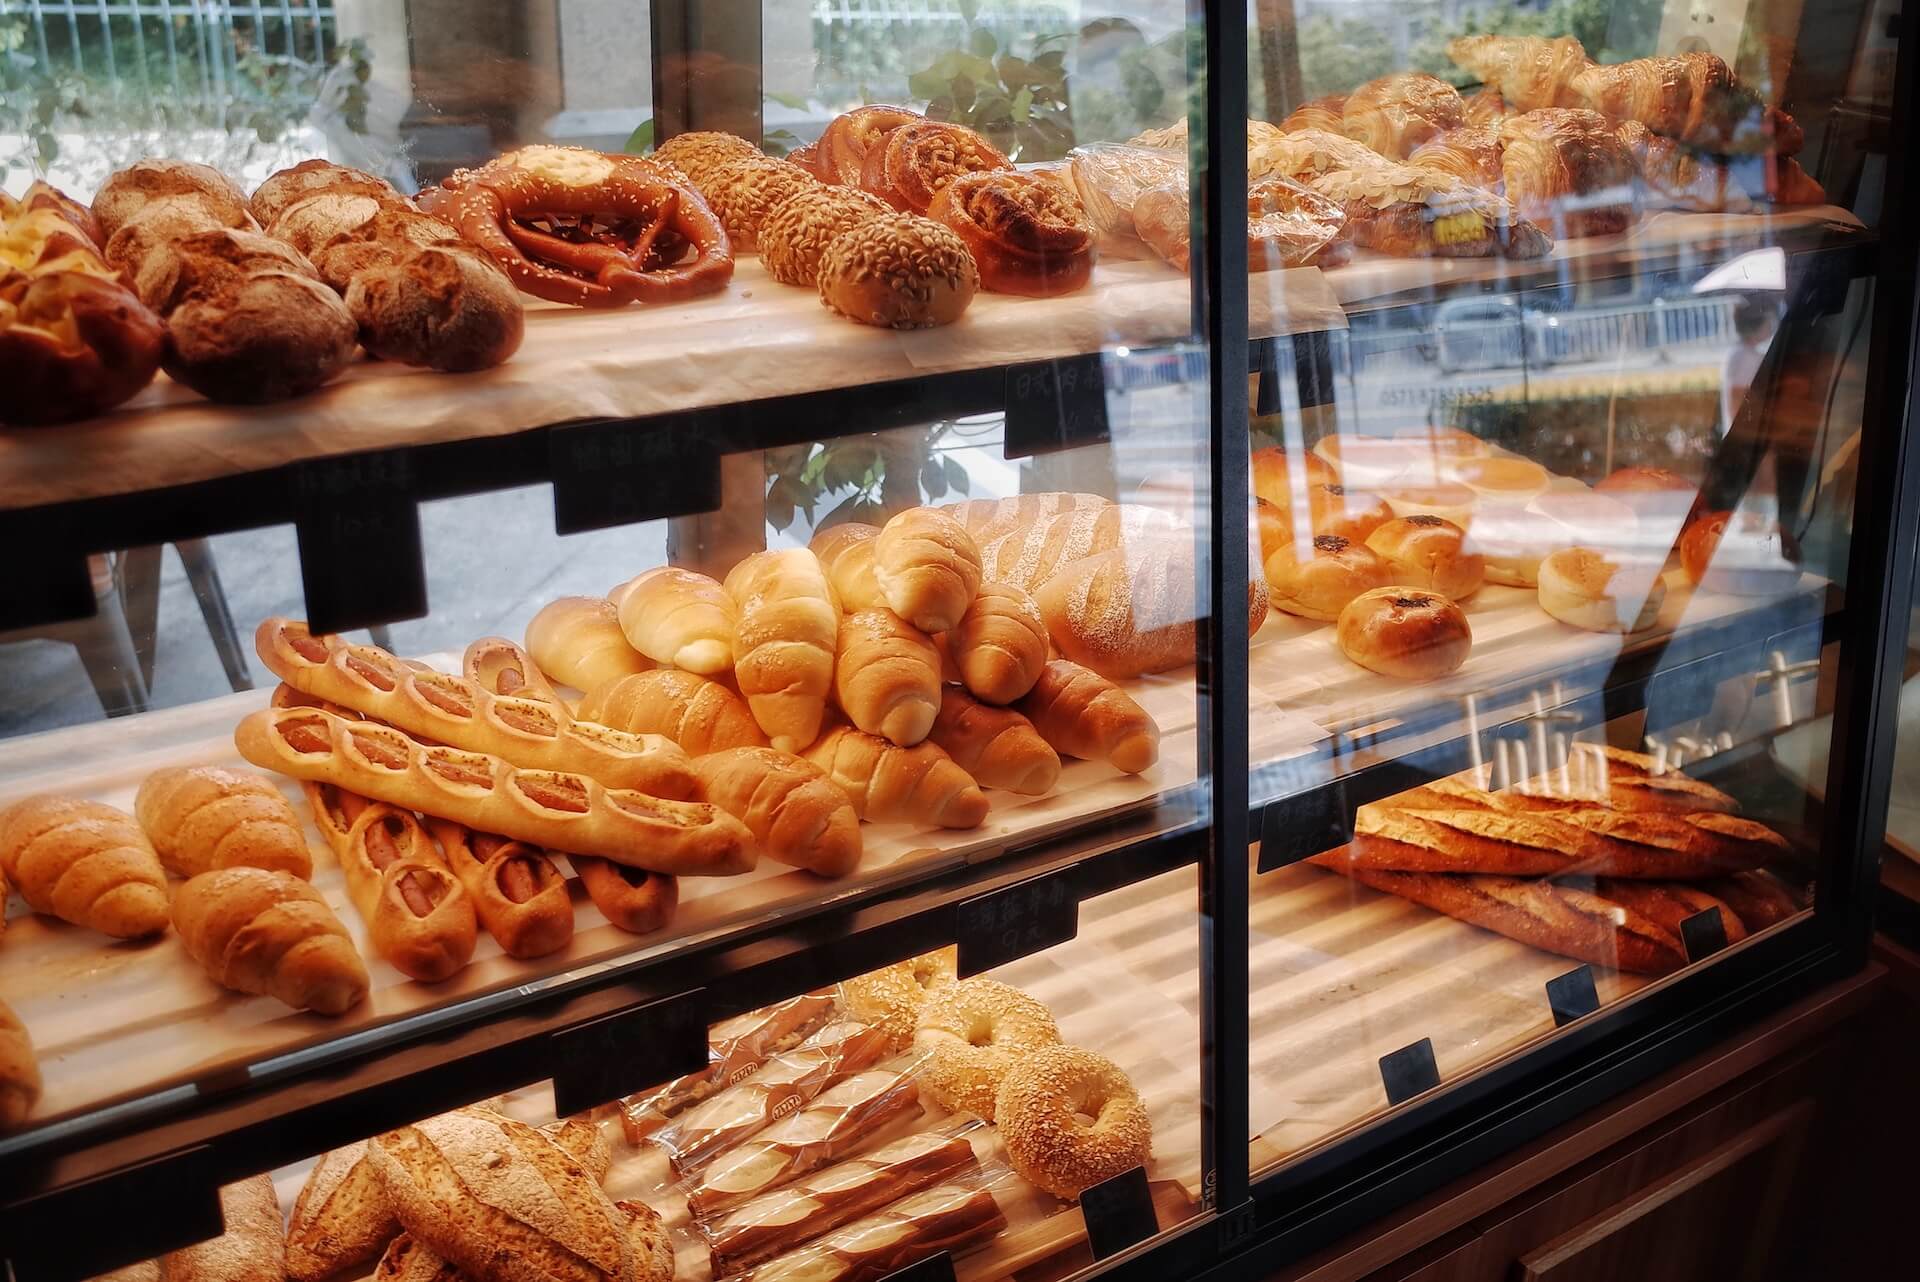 Bread and bakery products in glass display case